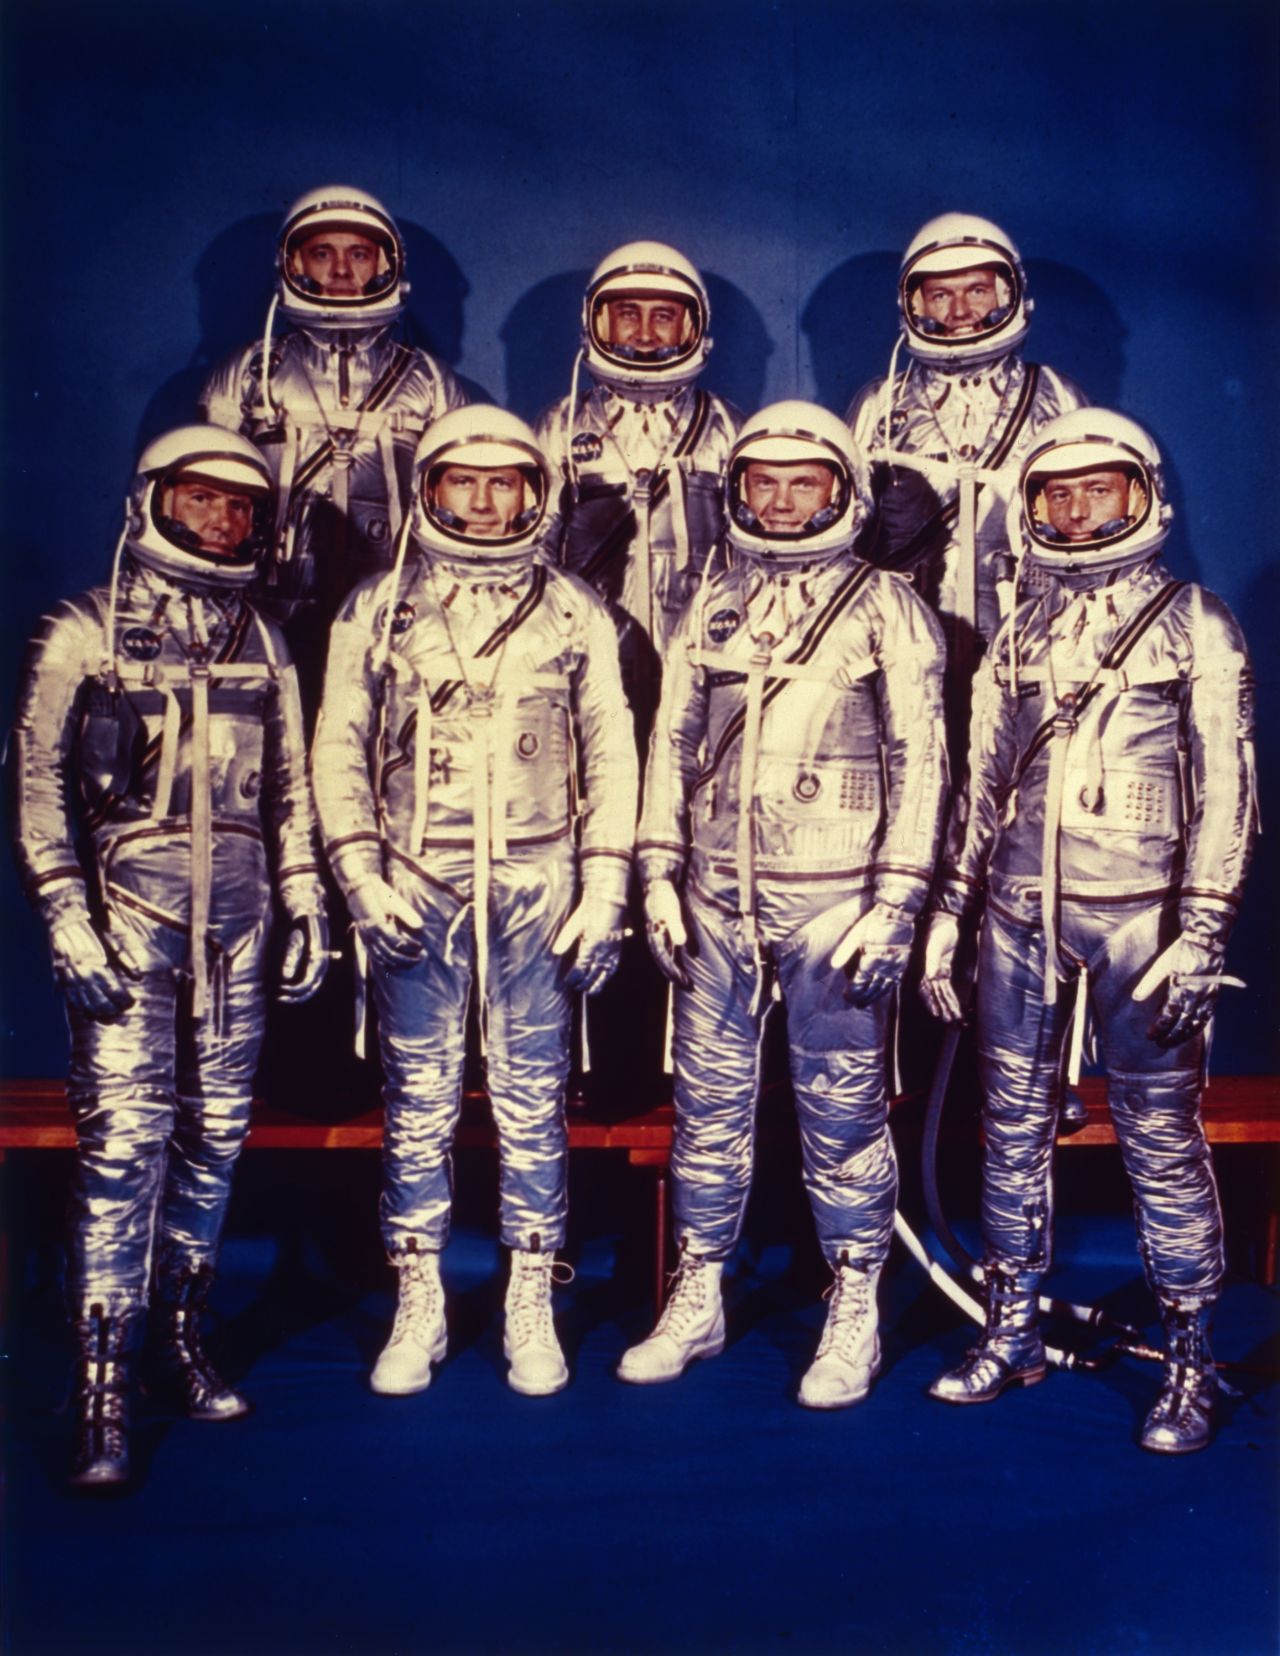 Despite its name, these seven NASA astronauts didn't land on Mercury. Instead, they were part of a mission to orbit the Earth, running from 1959 to 1963.